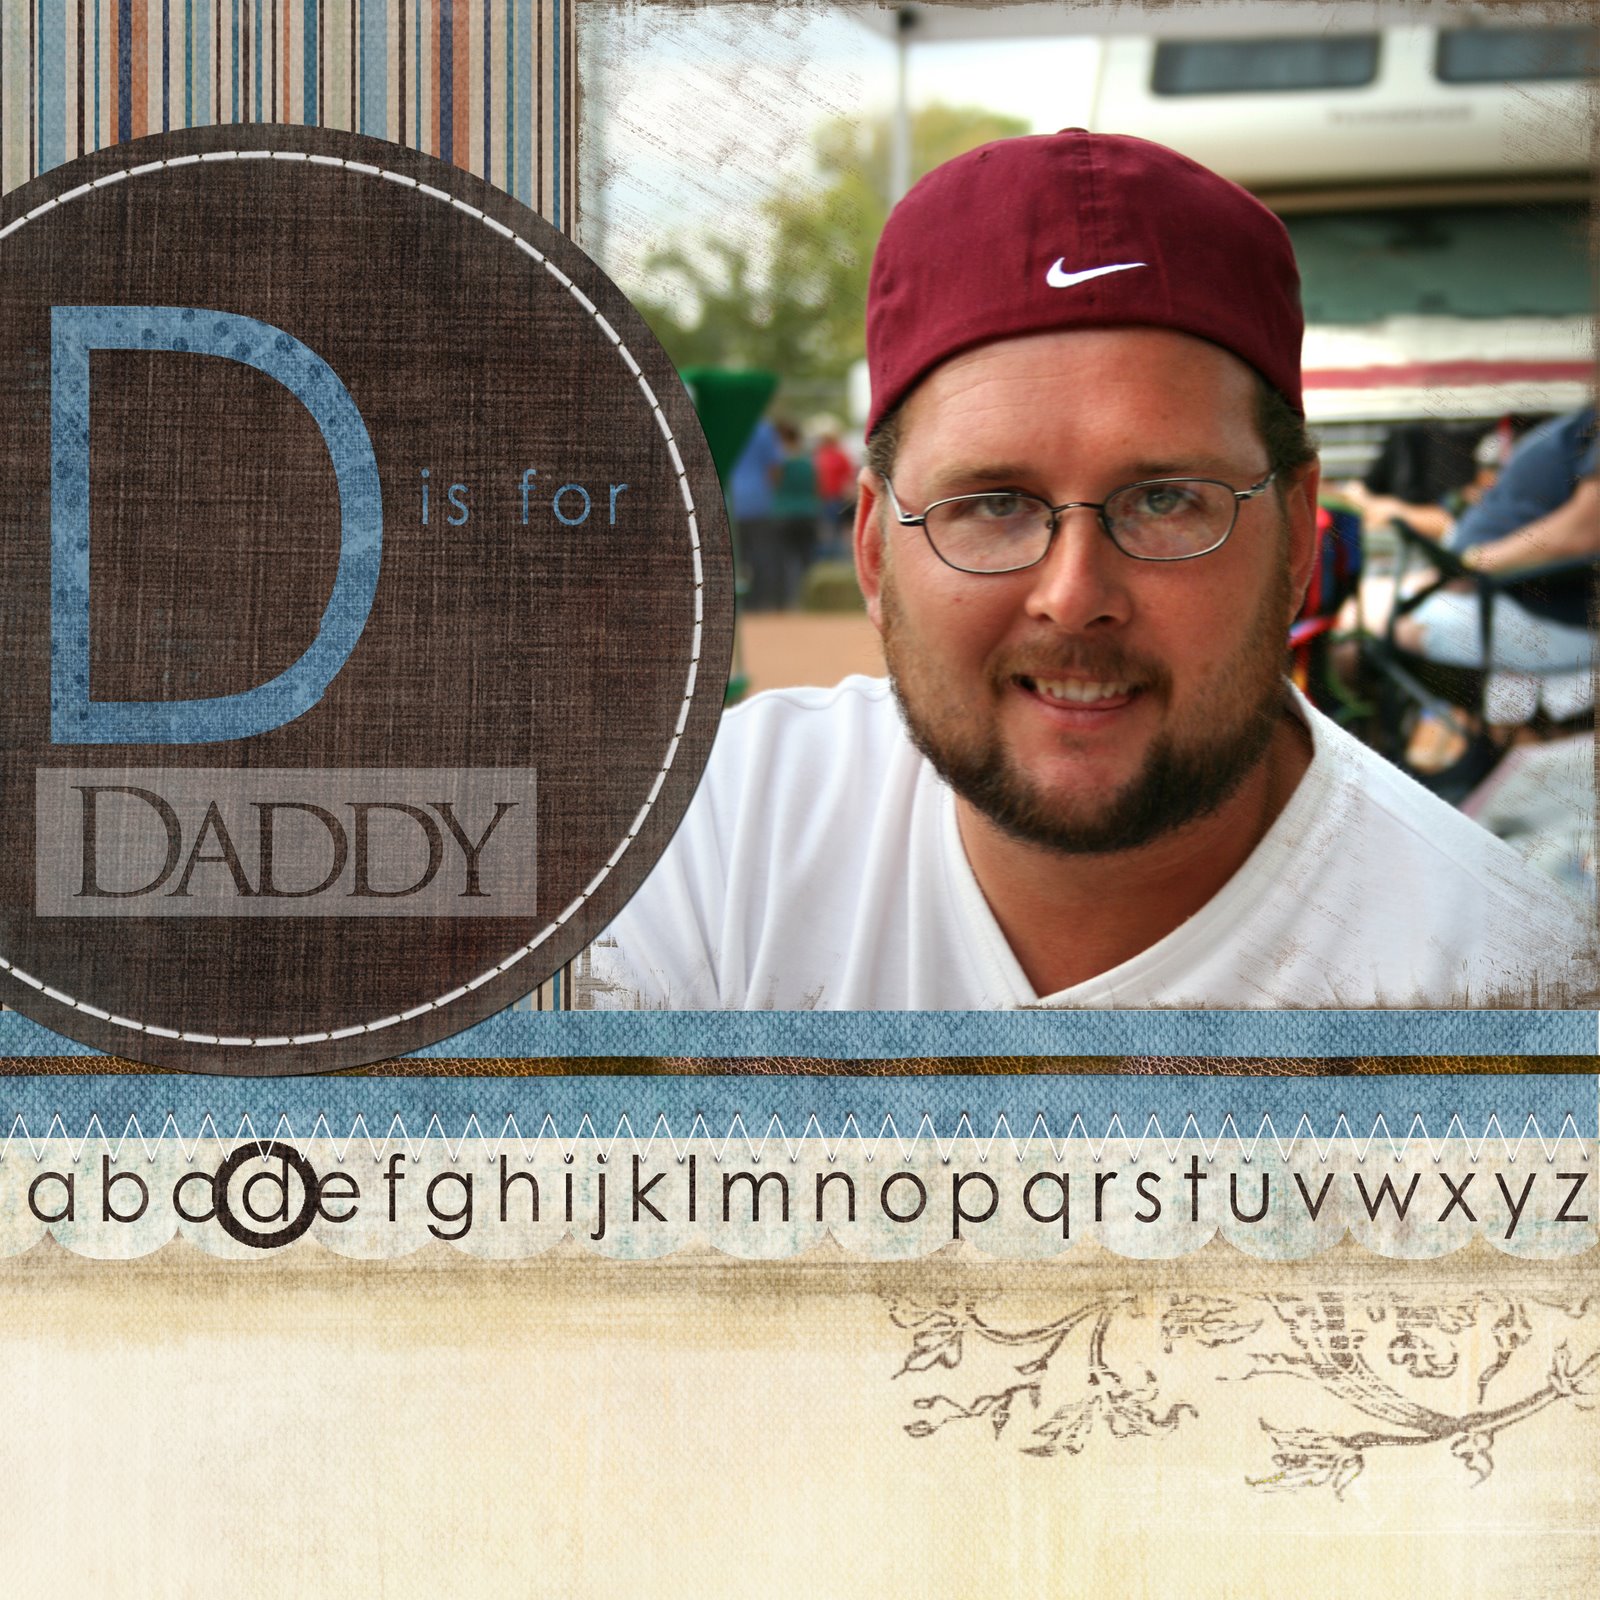 [D+is+for+daddy.jpg]